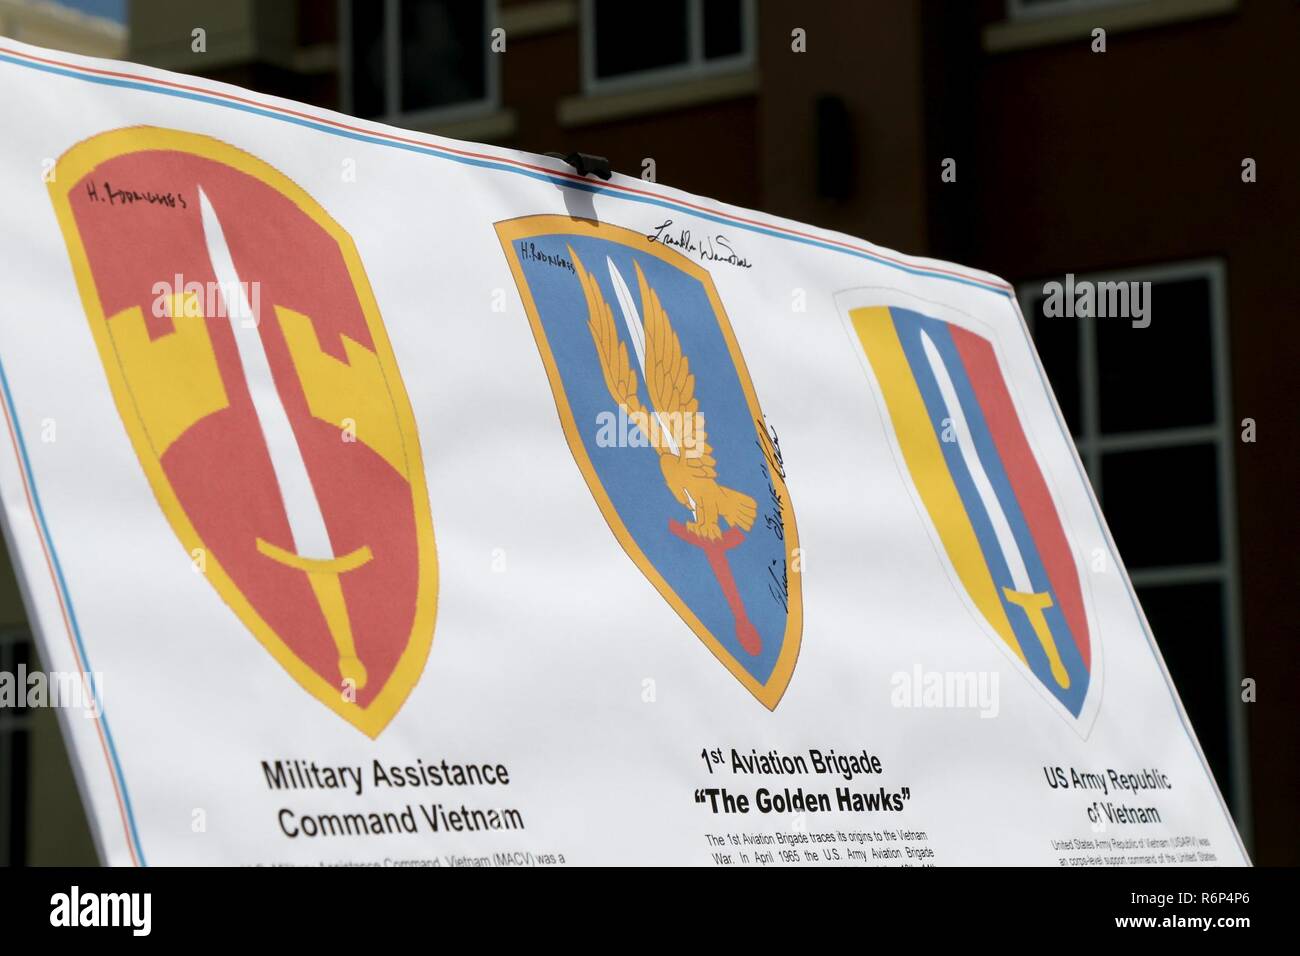 Memorial placards bearing the names and insignia of various military units  that served in the Vietnam Conflict are displayed during a Memorial Day  ceremony at the 29th Infantry Brigade Combat Team headquarters